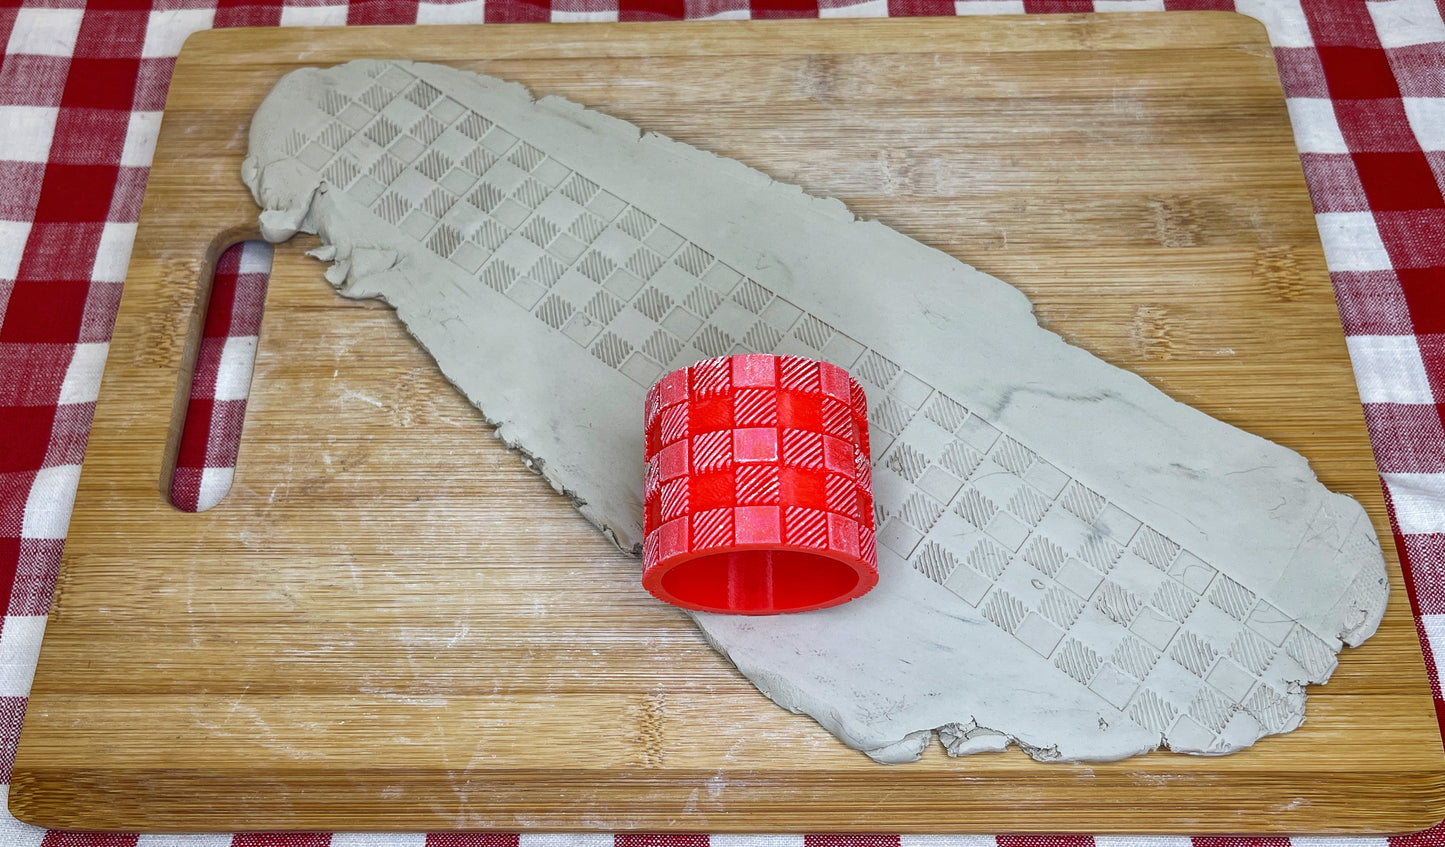 Buffalo Plaid/Gingham Check Pottery Roller Border Stamp, plaid design, Repeating pattern, Plastic 3d printed